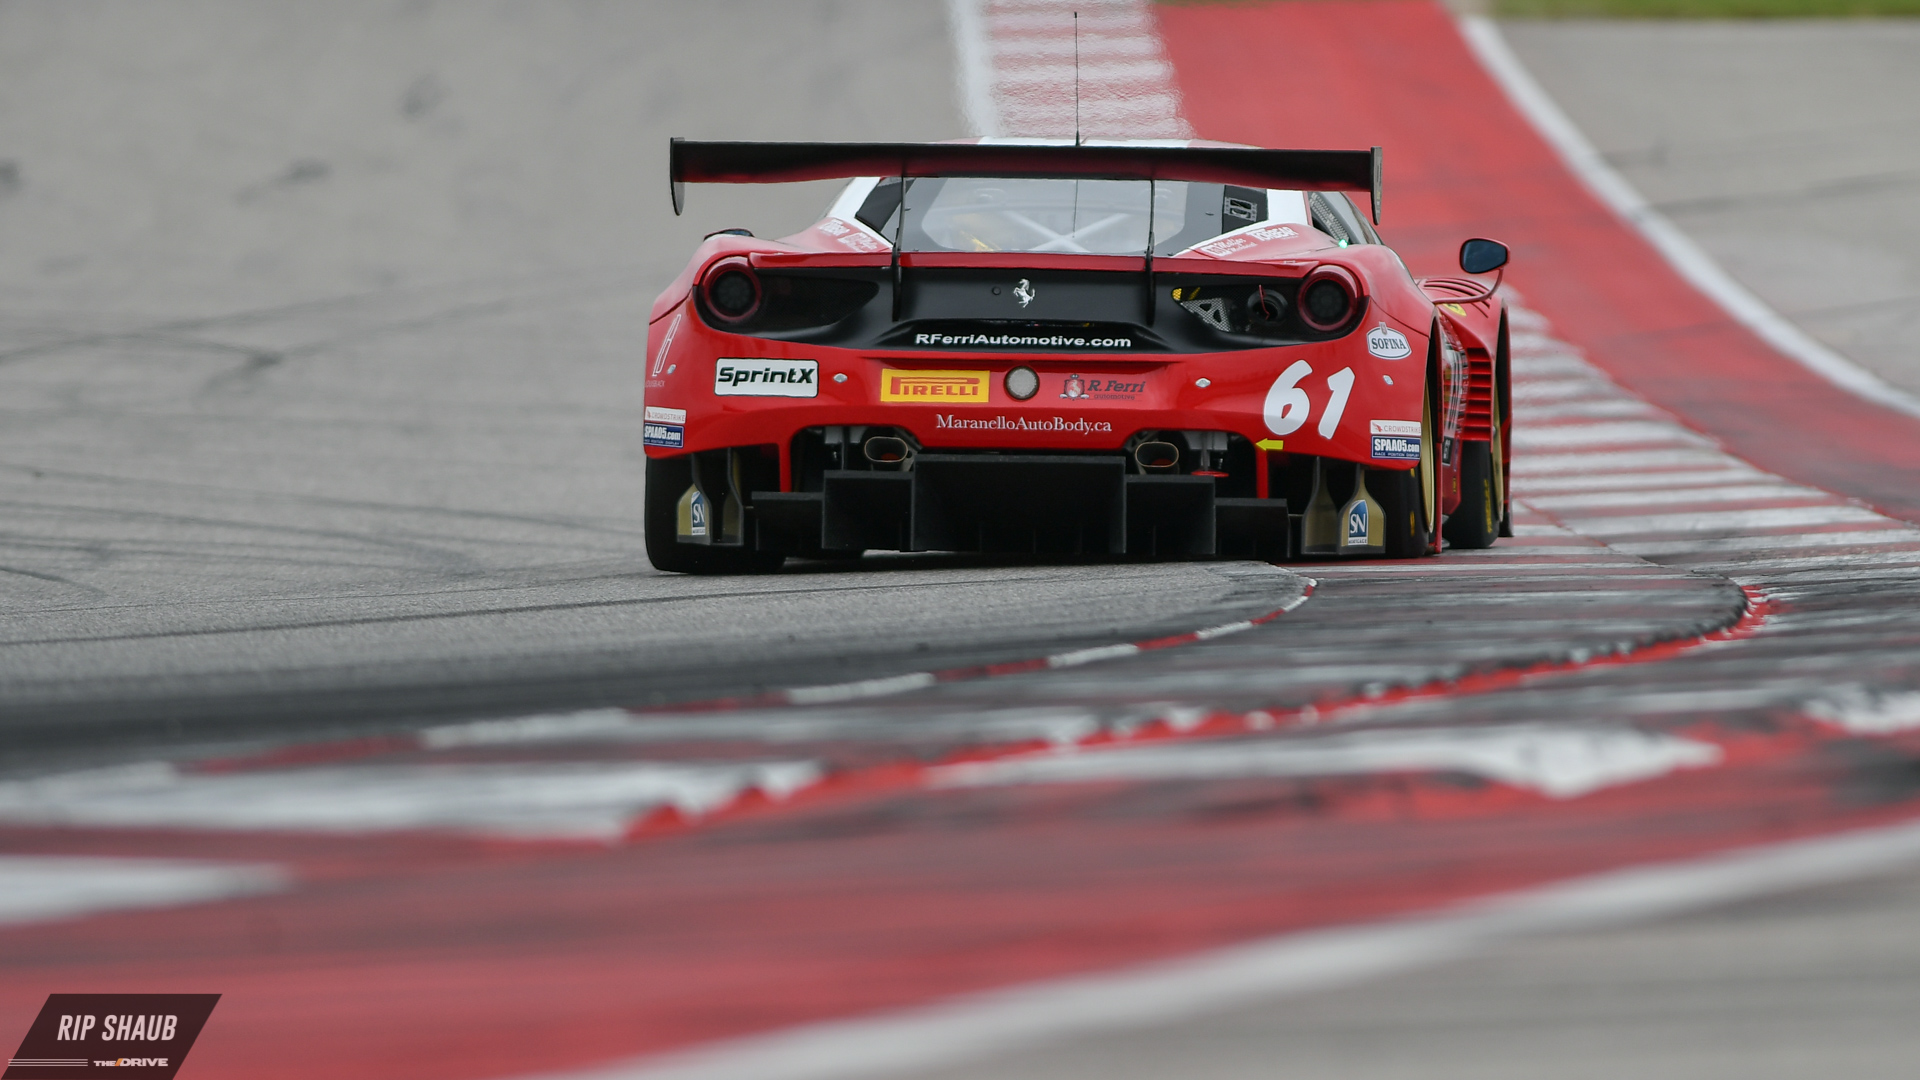 R. Ferri Motorsport won both of the weekends GT Class races with Toni Vilander and Miguel Molina behind the wheel., <i>© Rip Shaub - All Rights Reserved</i>